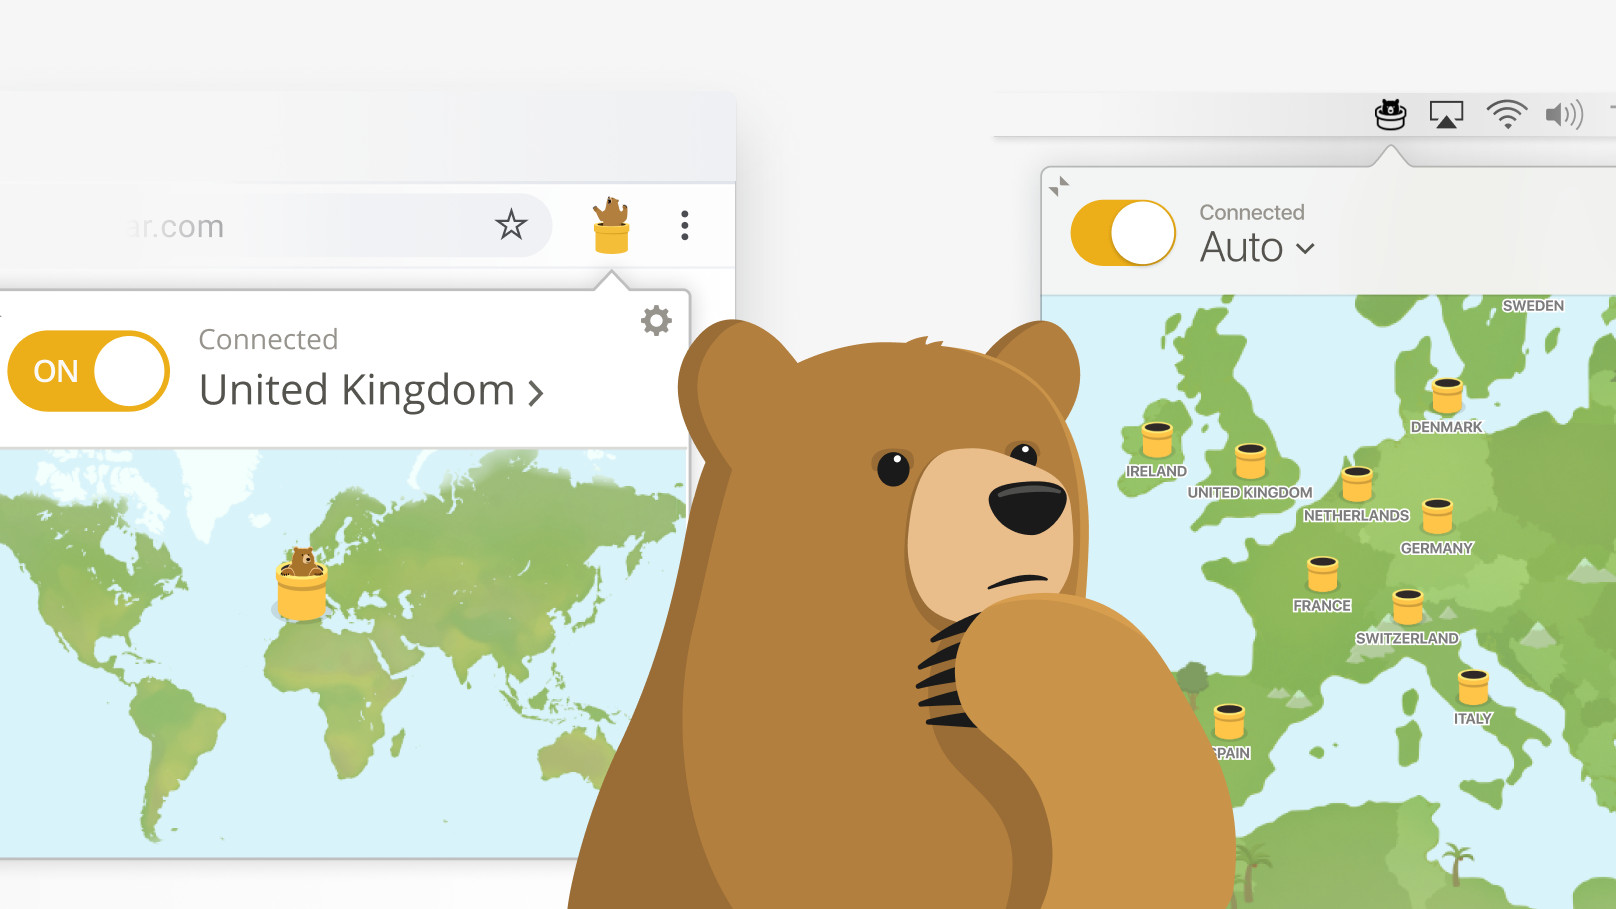 TunnelBear Review 2023: Is It Safe & Good to Use?